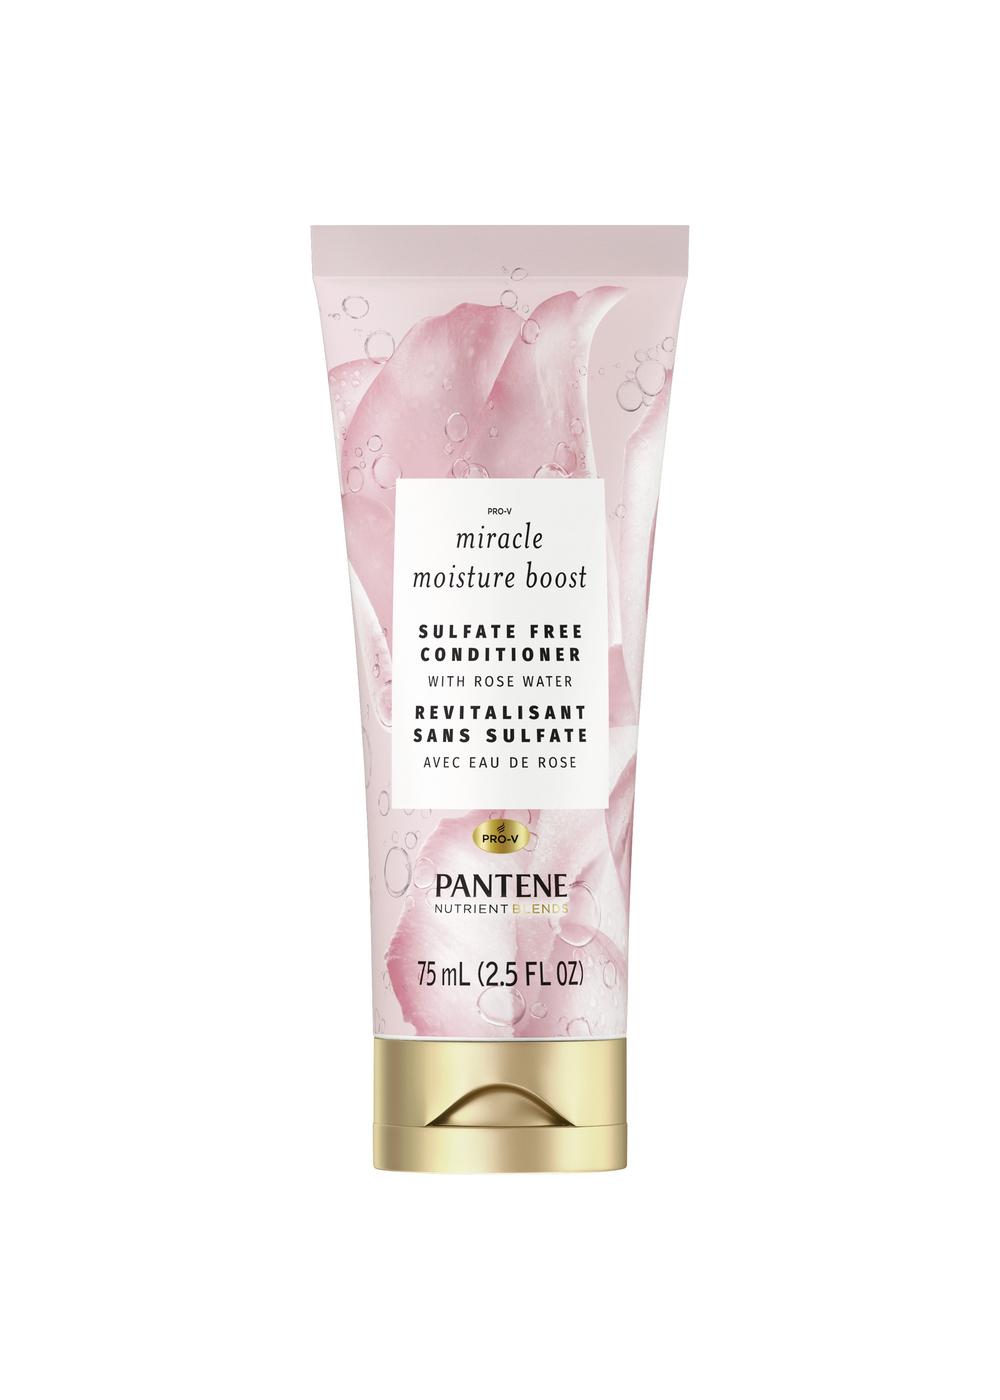 Pantene Pro-V Nutrient Blends Miracle Moisture Boost Conditioner; image 1 of 7